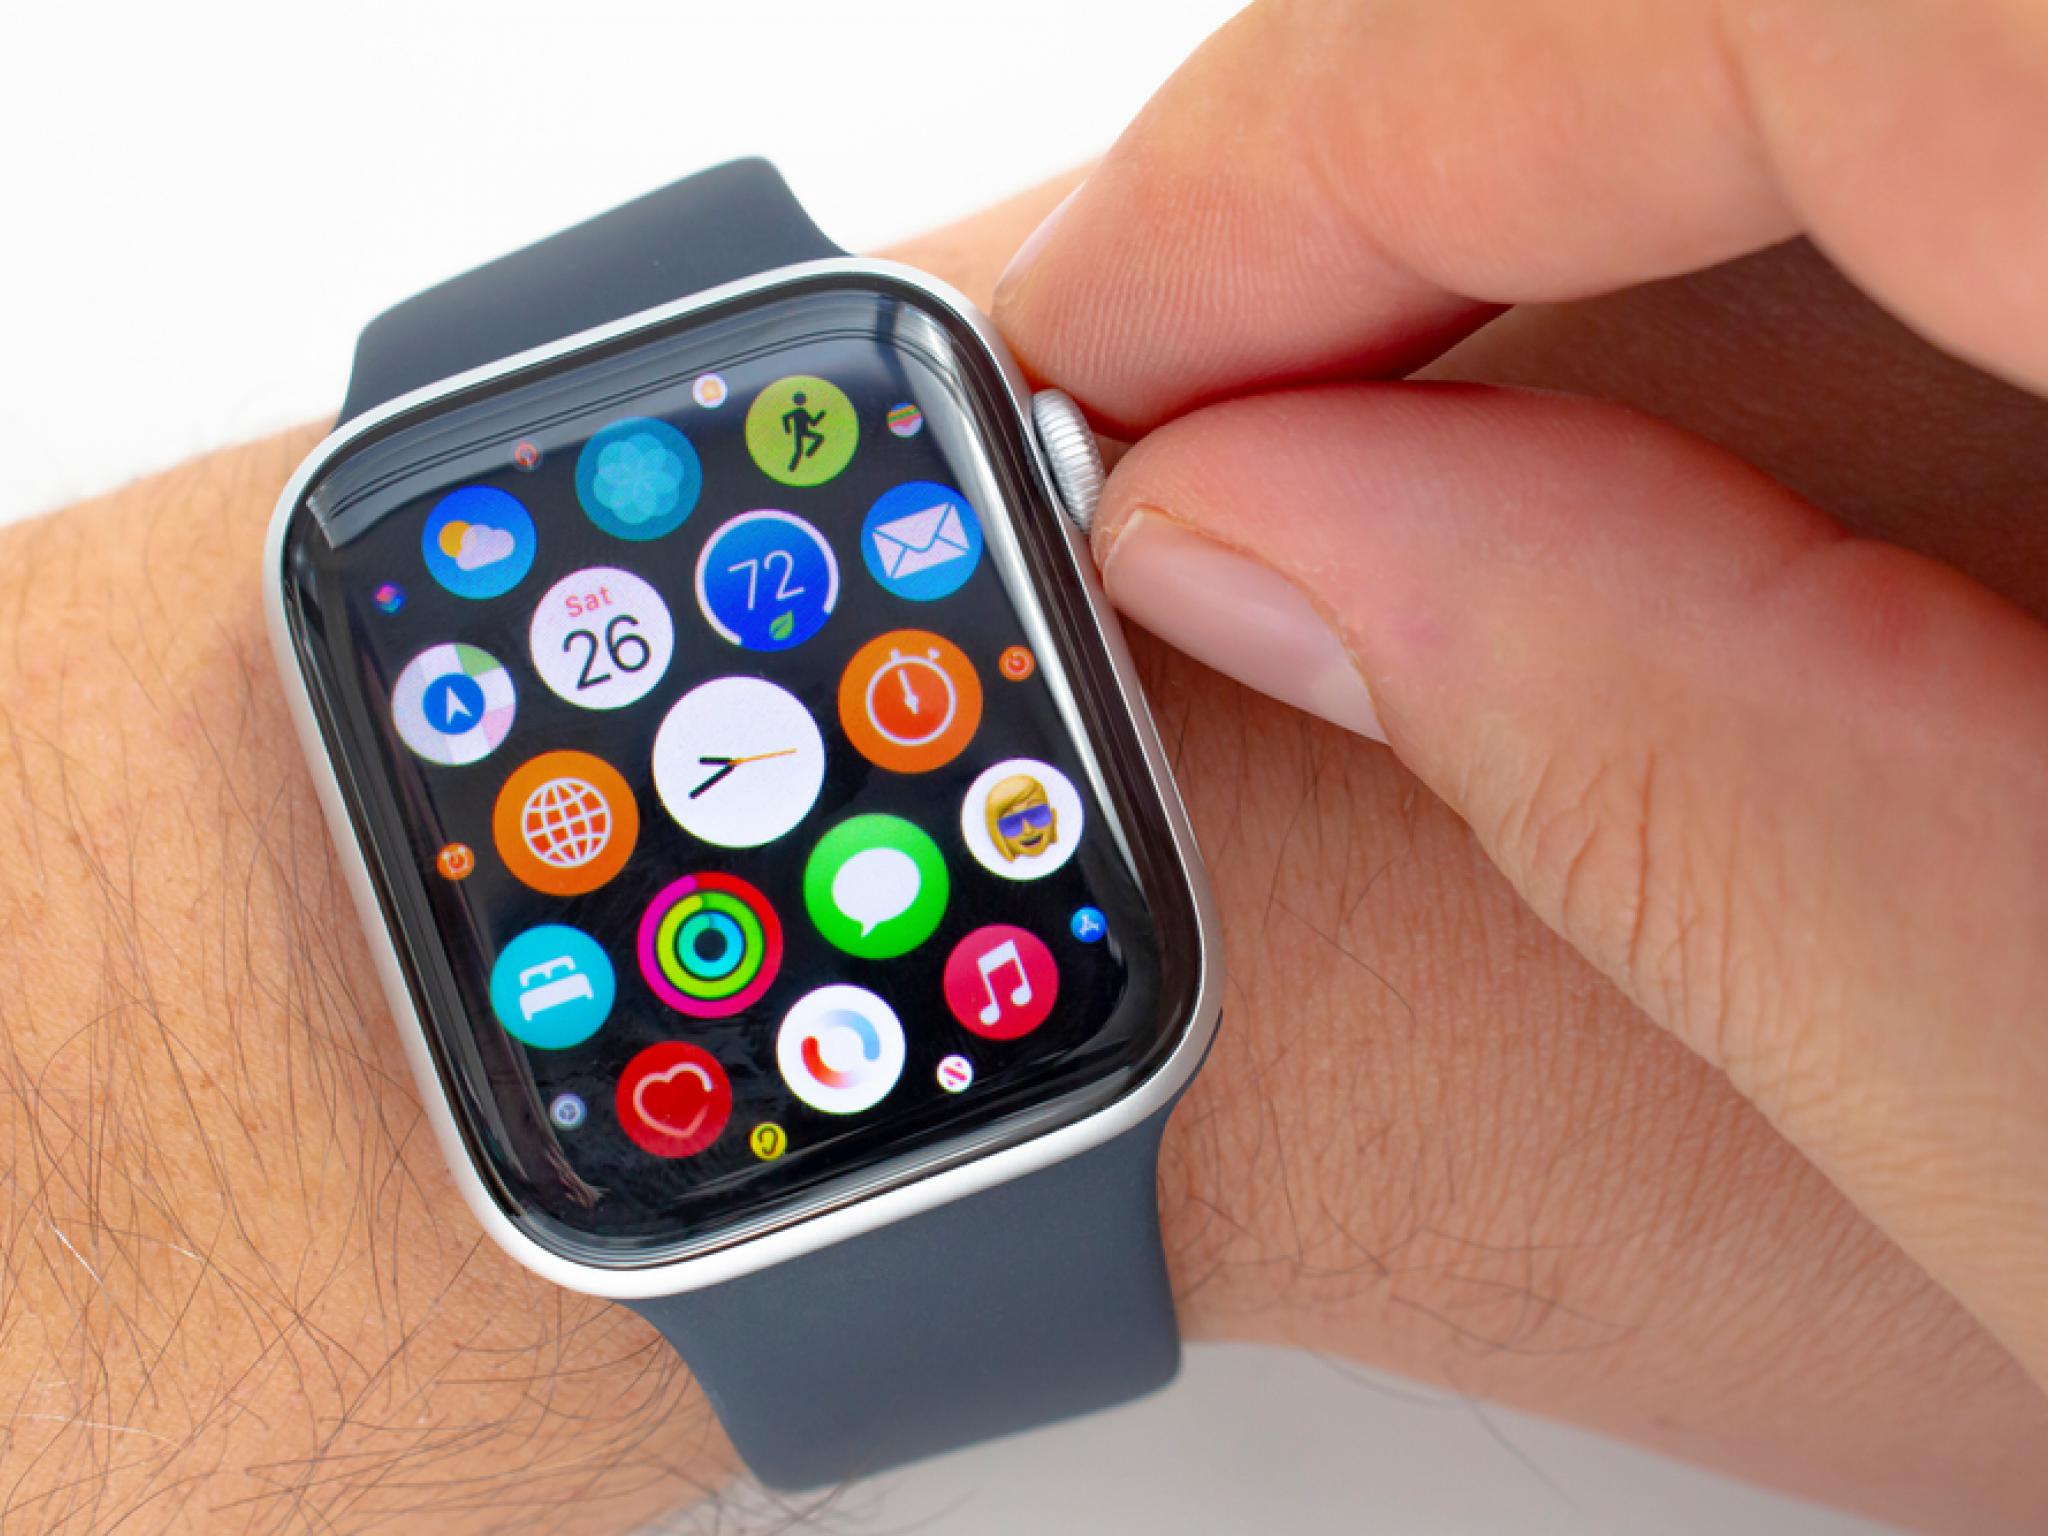  no-more-apple-watch-guilt-device-to-let-users-finally-take-rest-days 